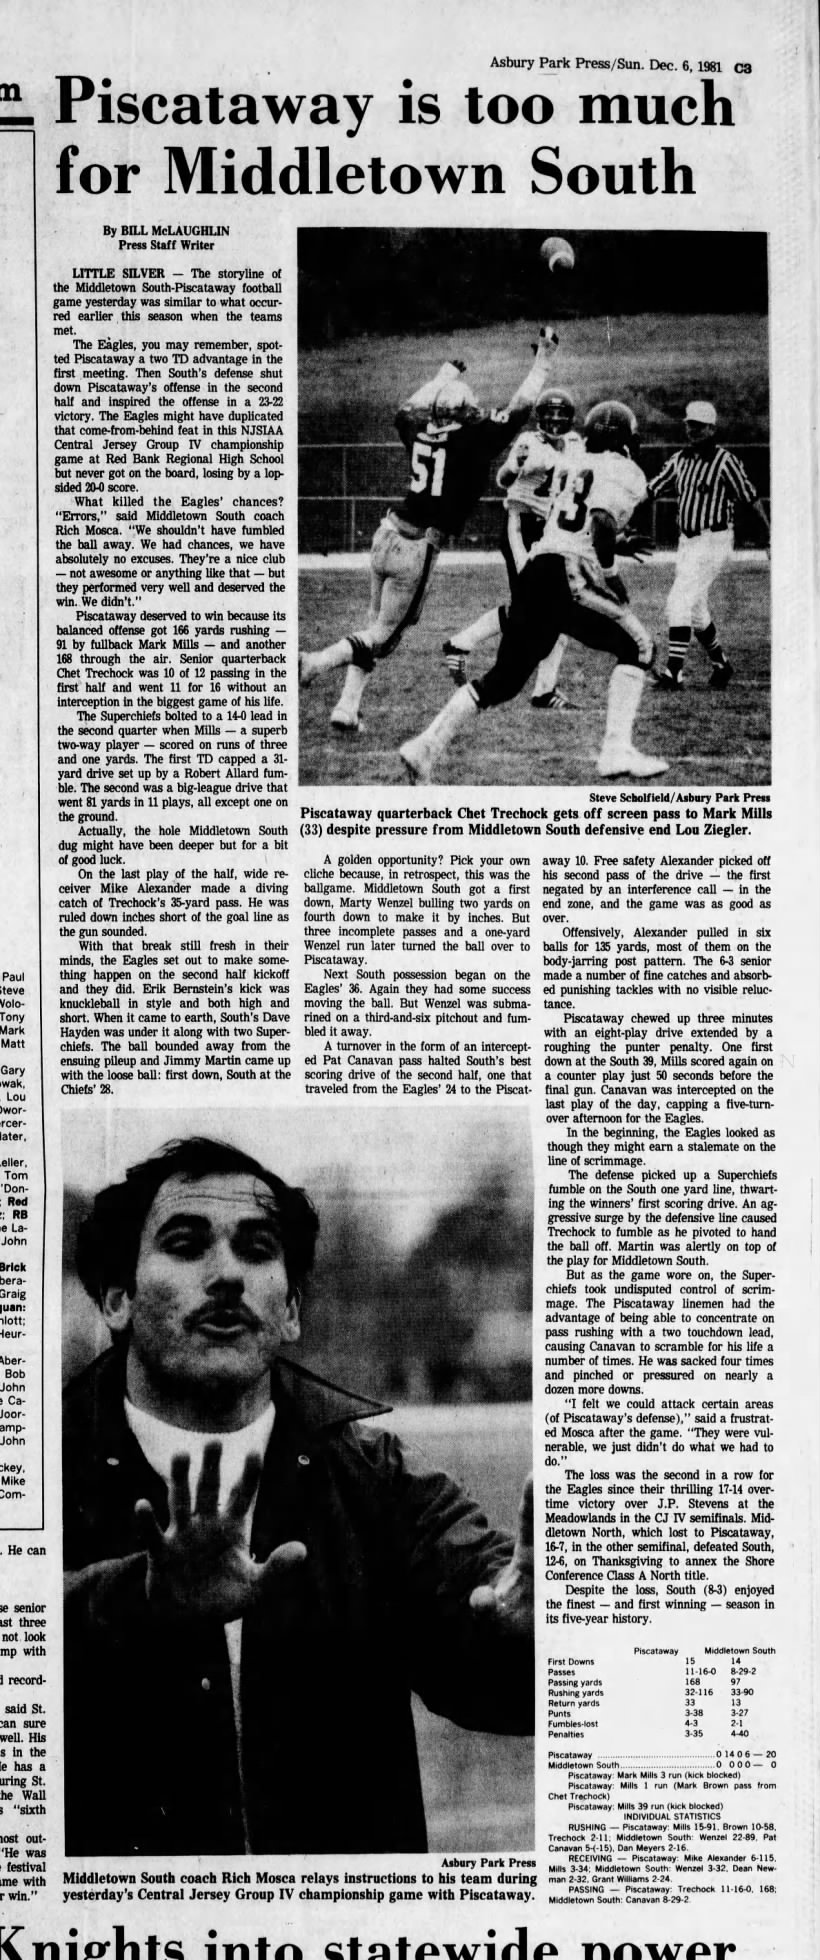 Piscataway Defeats Middletown South for 1981 Central Jersey Group IV Title